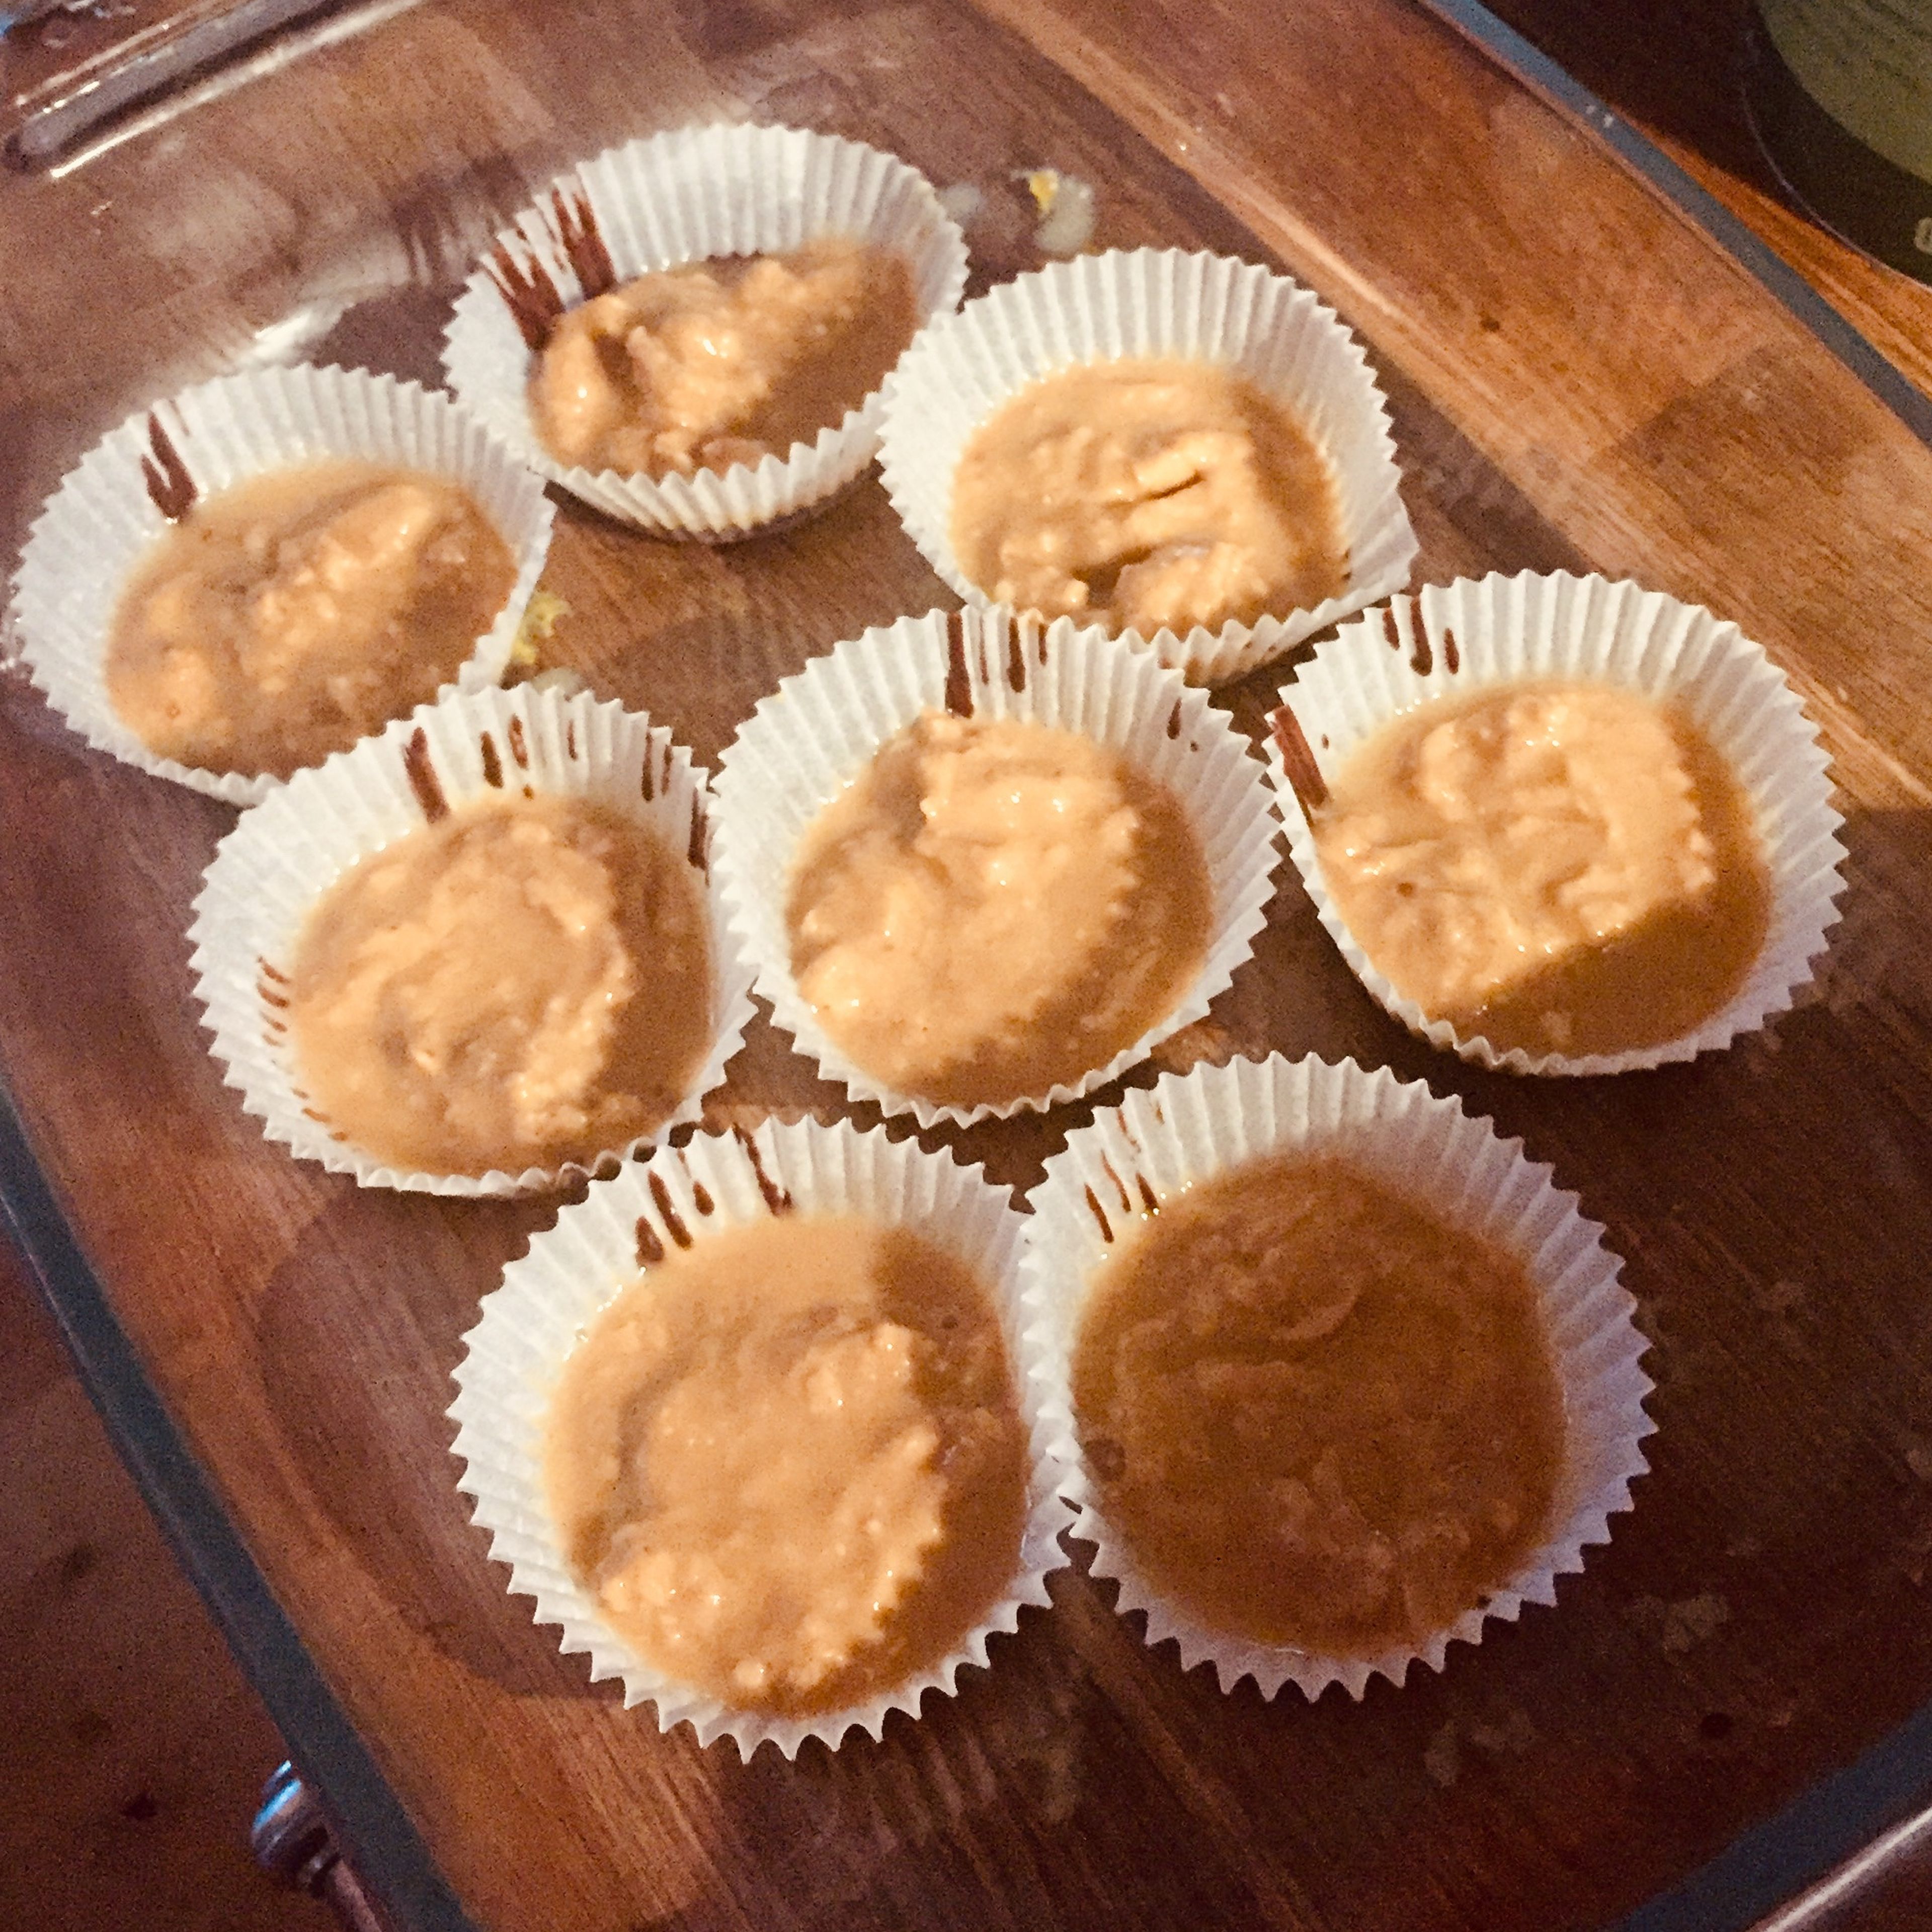 Take the peanut butter cups out of the freezer and add a thin layer of unsweetened peanut butter.